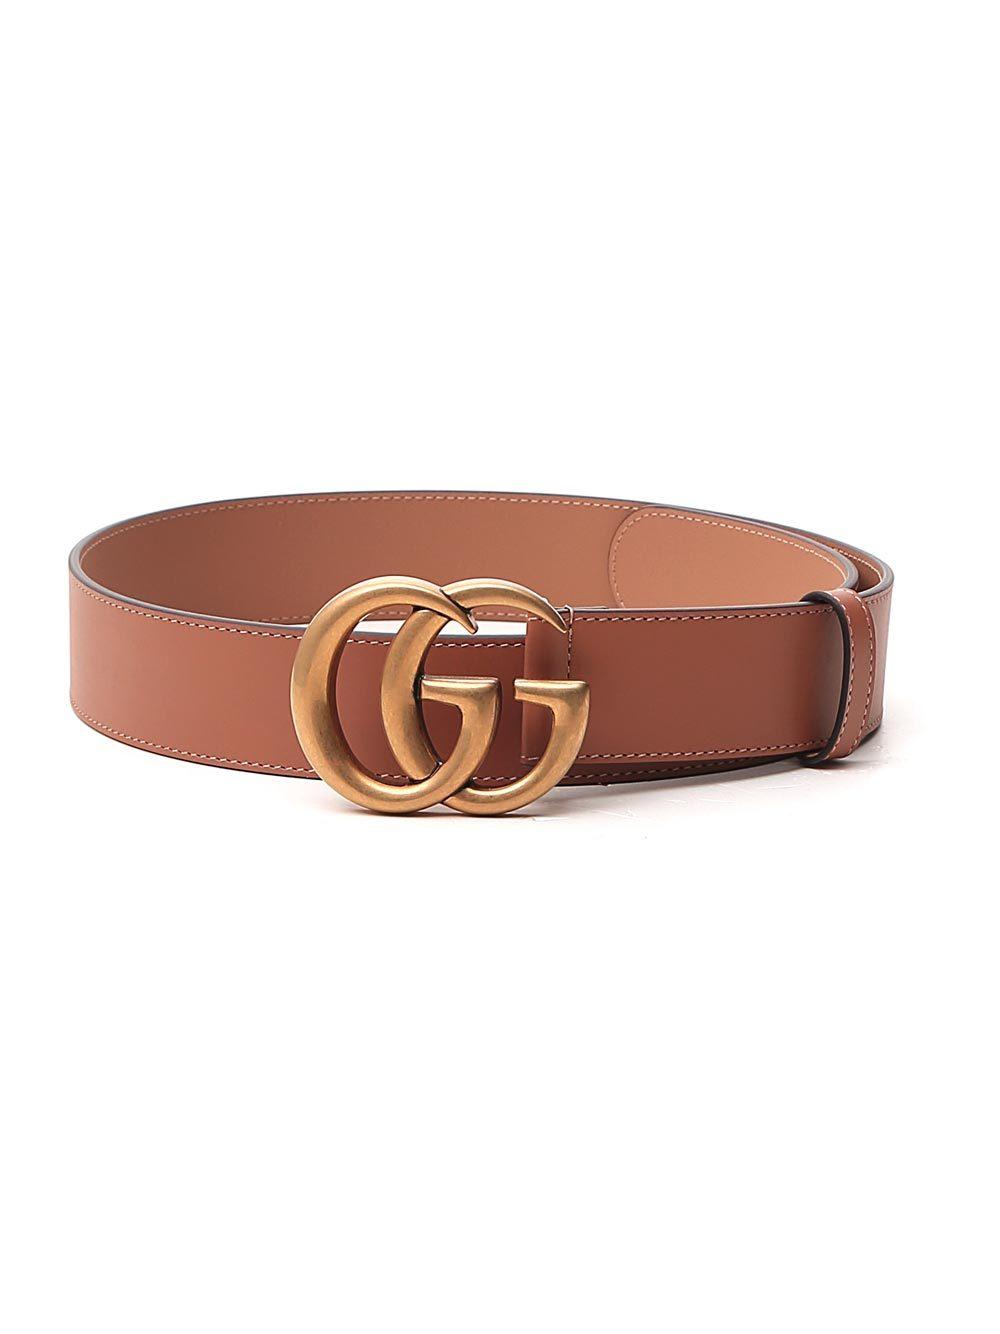 Gucci Double G Buckle Leather Belt in Pink (Black) for Men - Save 24% - Lyst